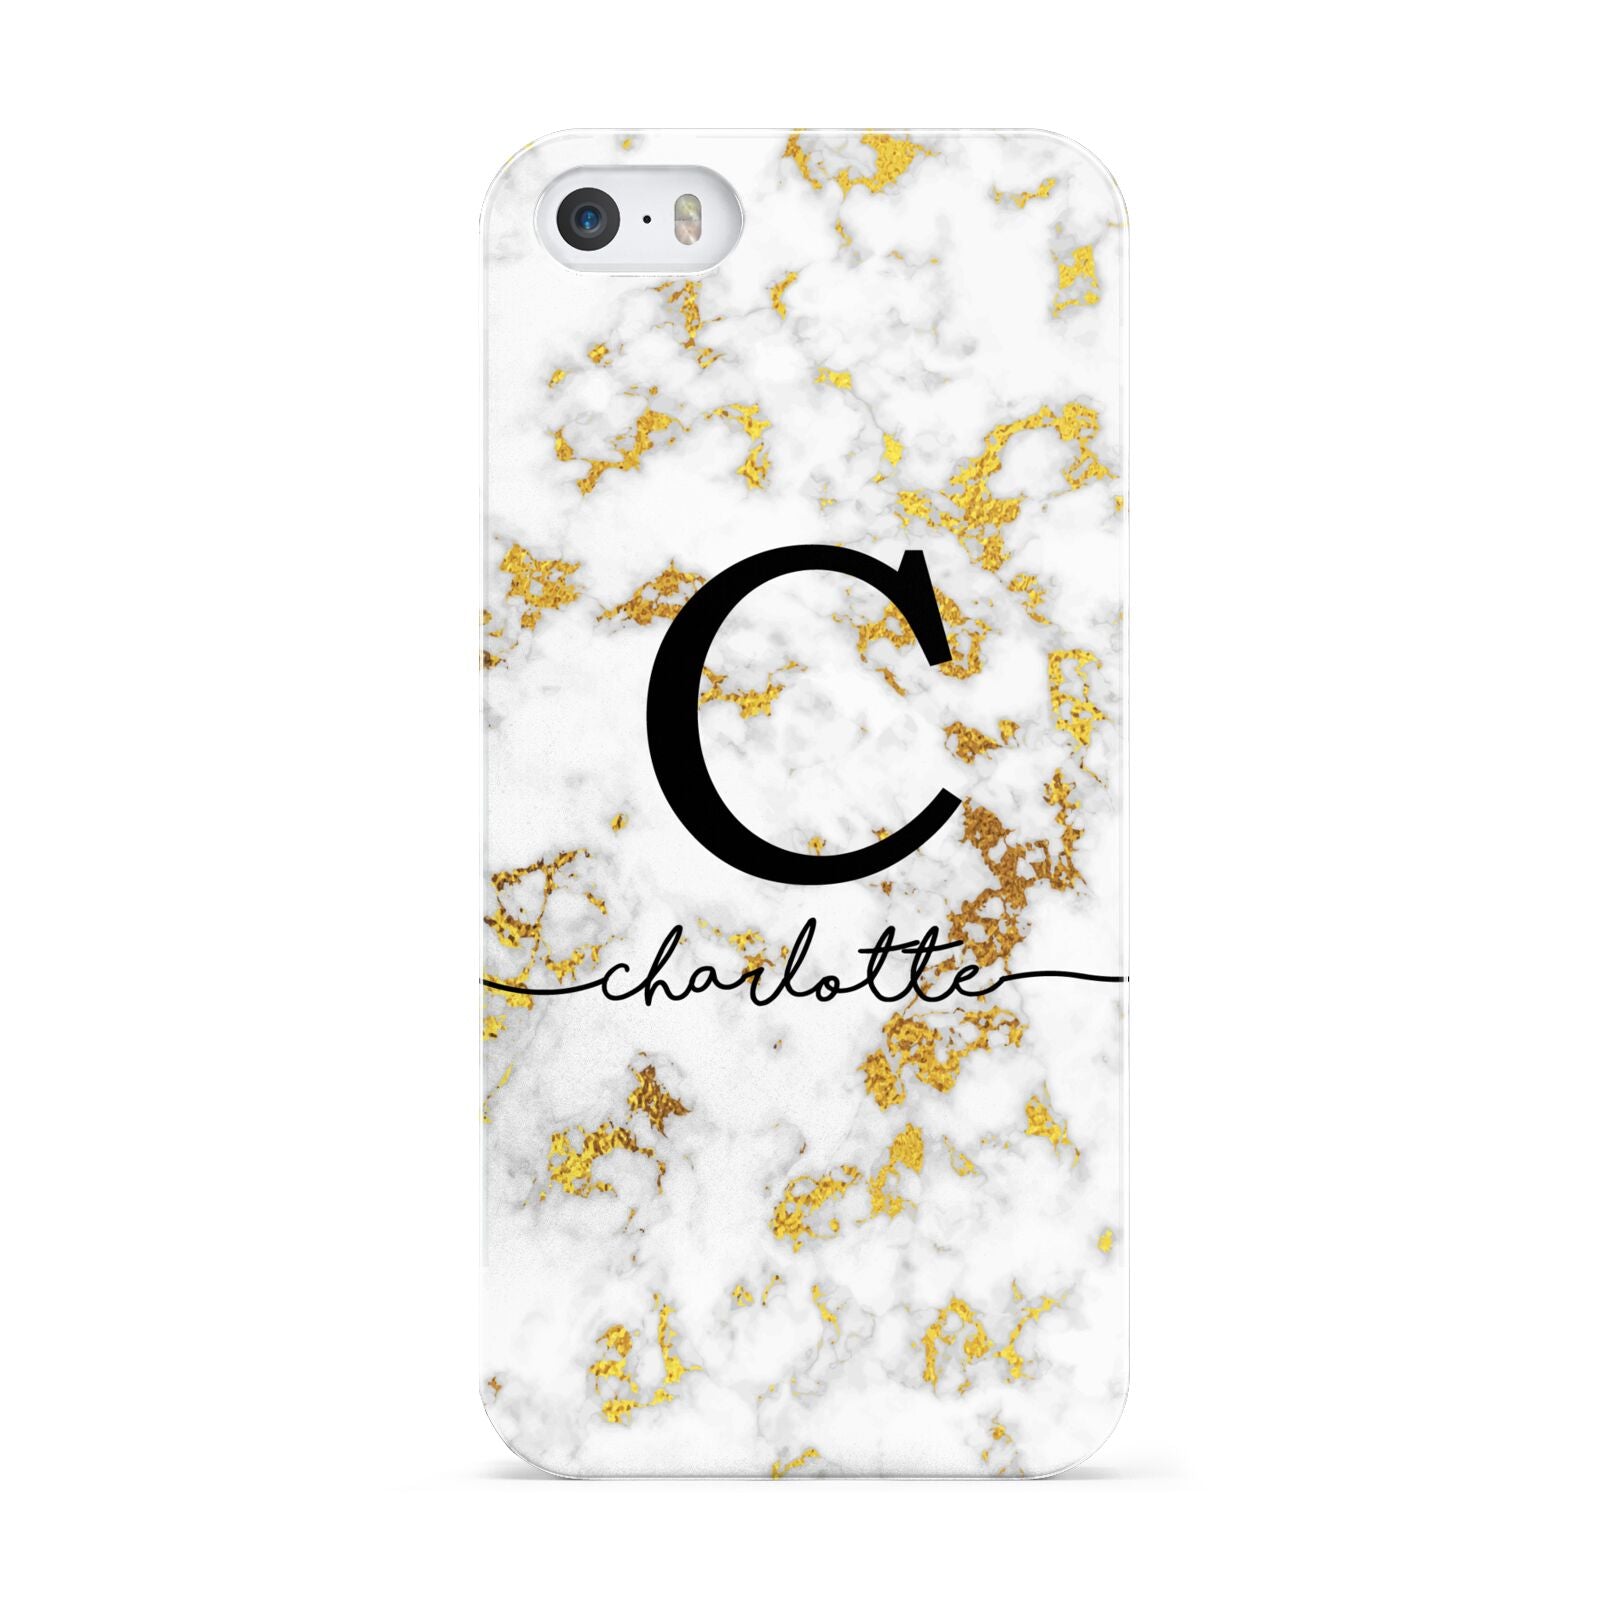 Initialled White Gold Marble with Name Apple iPhone 5 Case